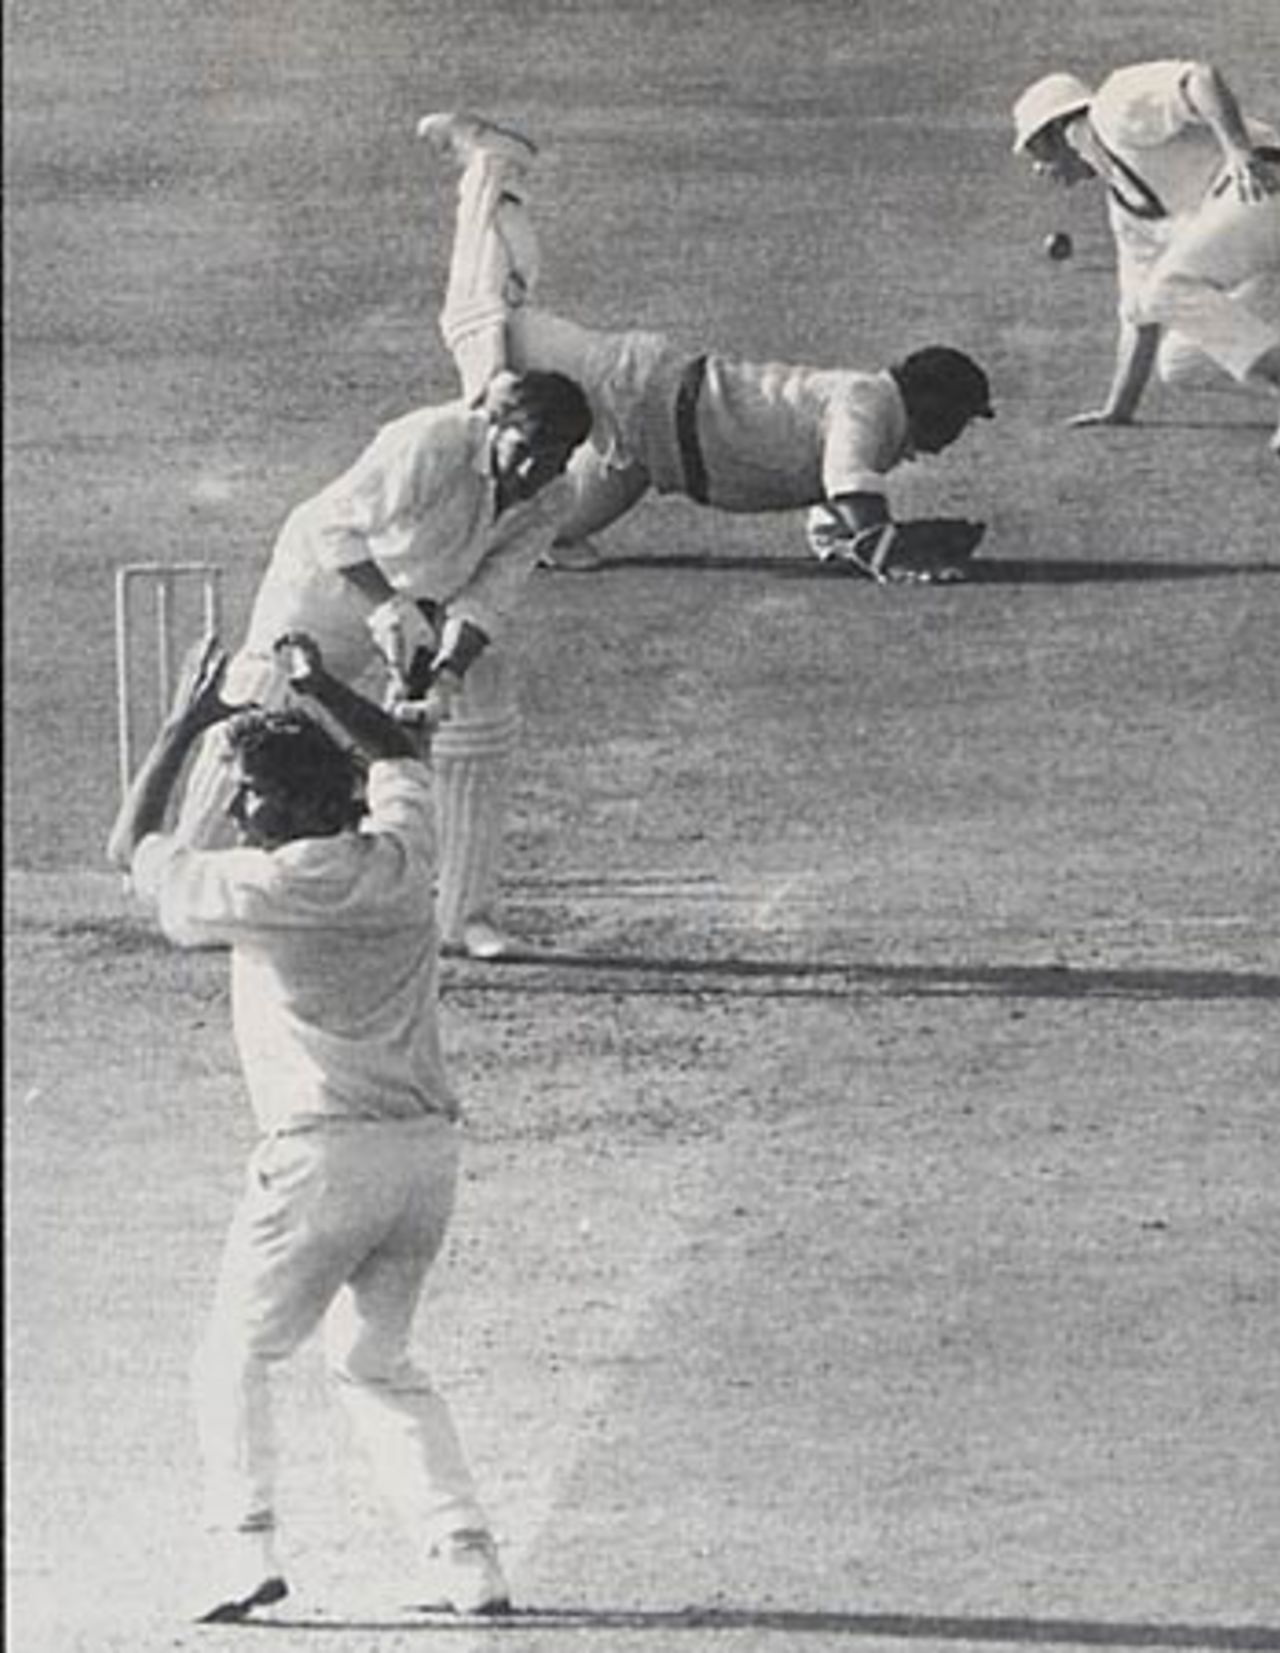 Bob Massie misses out during his 16-wicket haul as a Peter Parfitt edge evades Rod Marsh and Ian Chappell, England v Australia, Lord's , June 1972